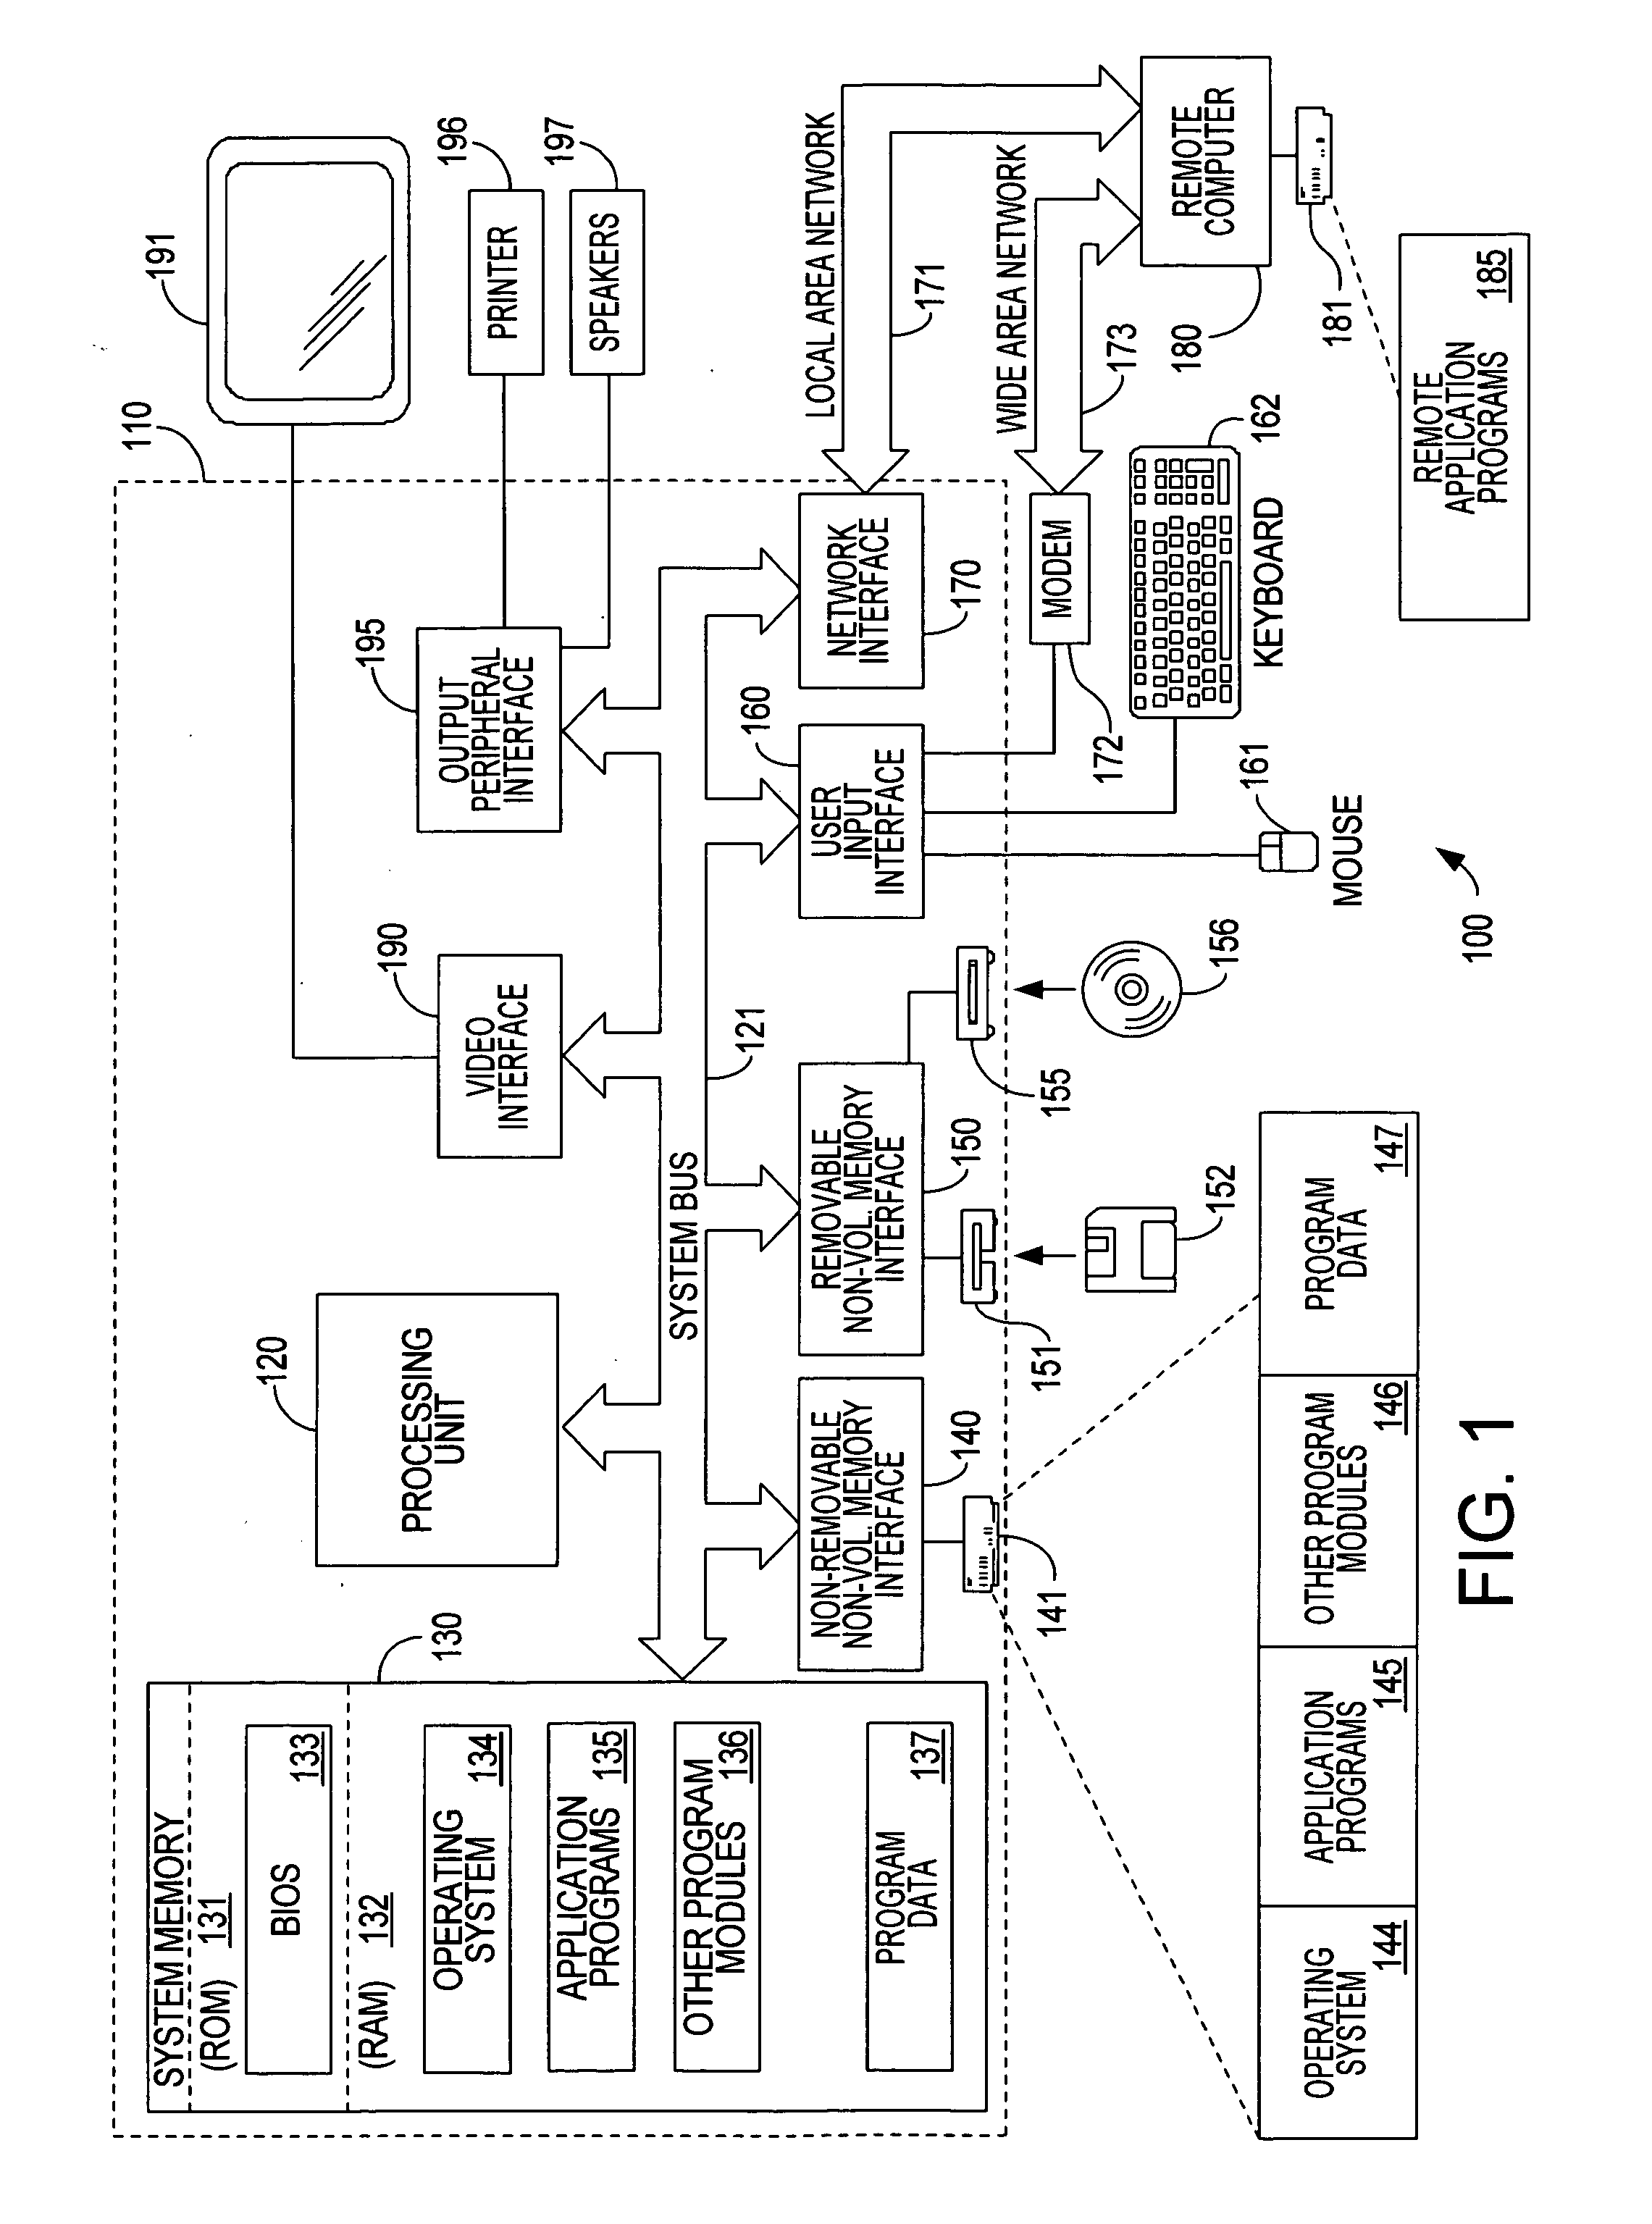 Method and system for displaying transient notifications